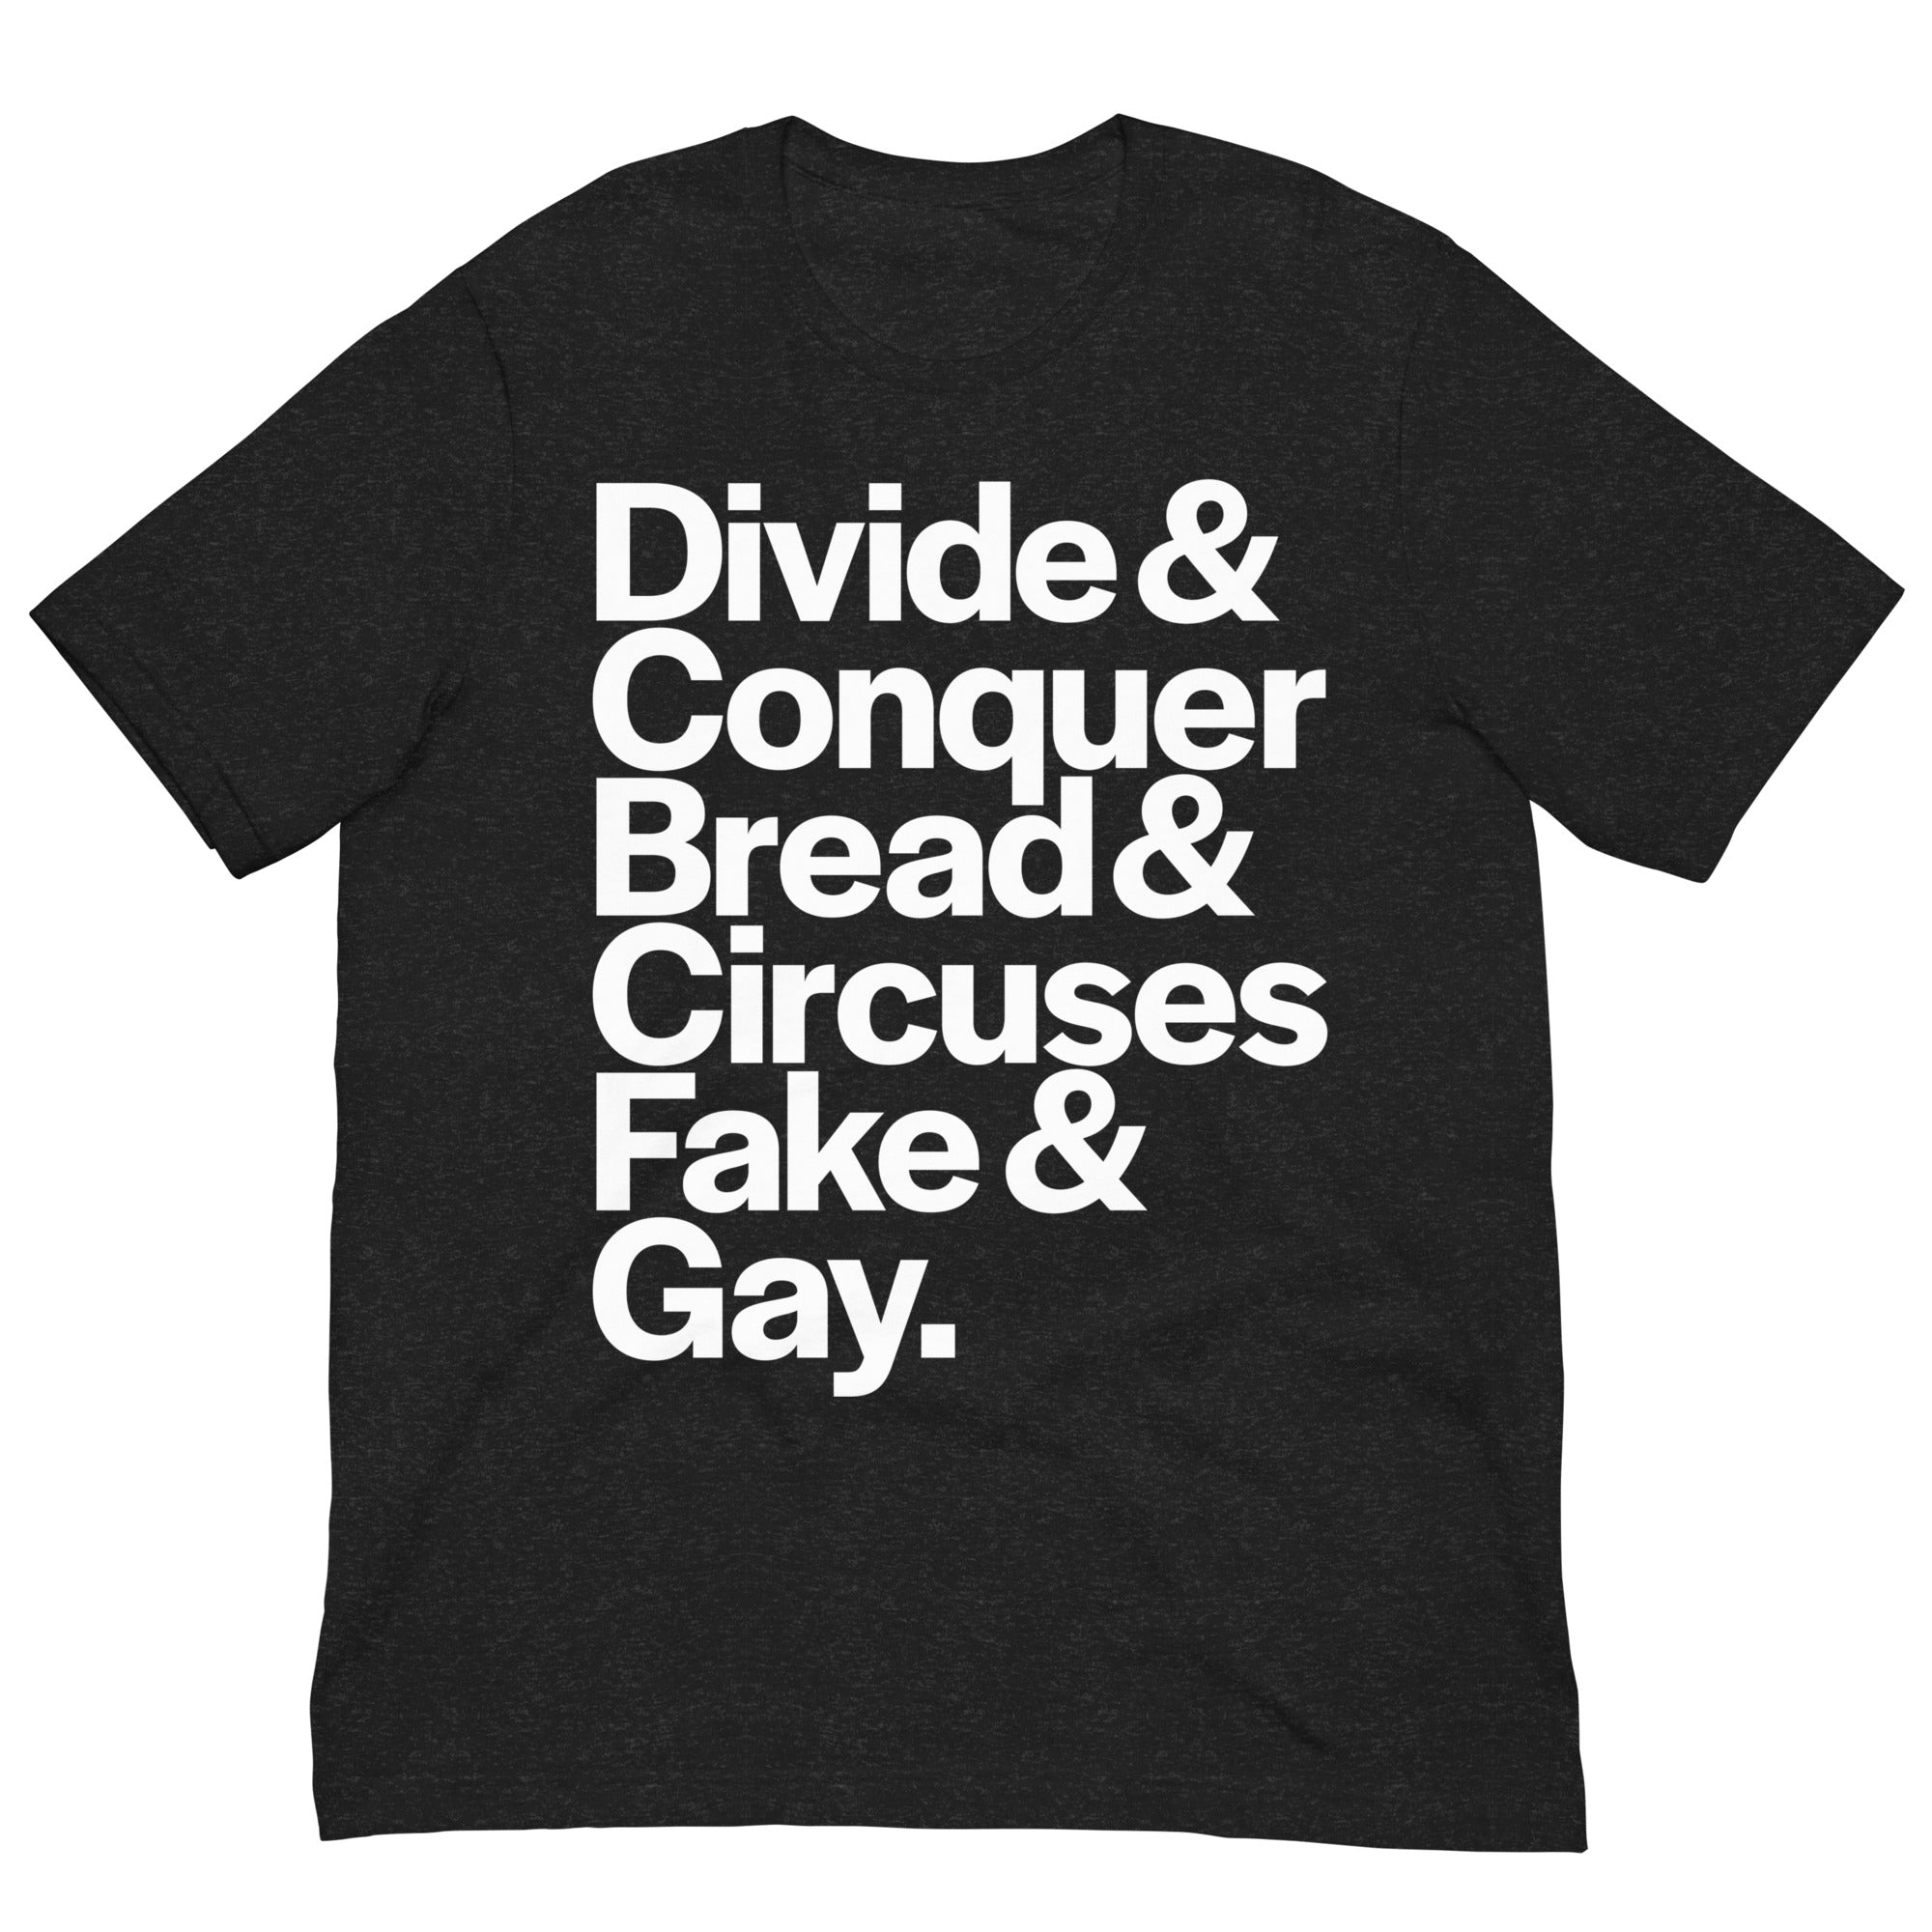 Divide & Conquer Ampersand Graphic T-Shirt